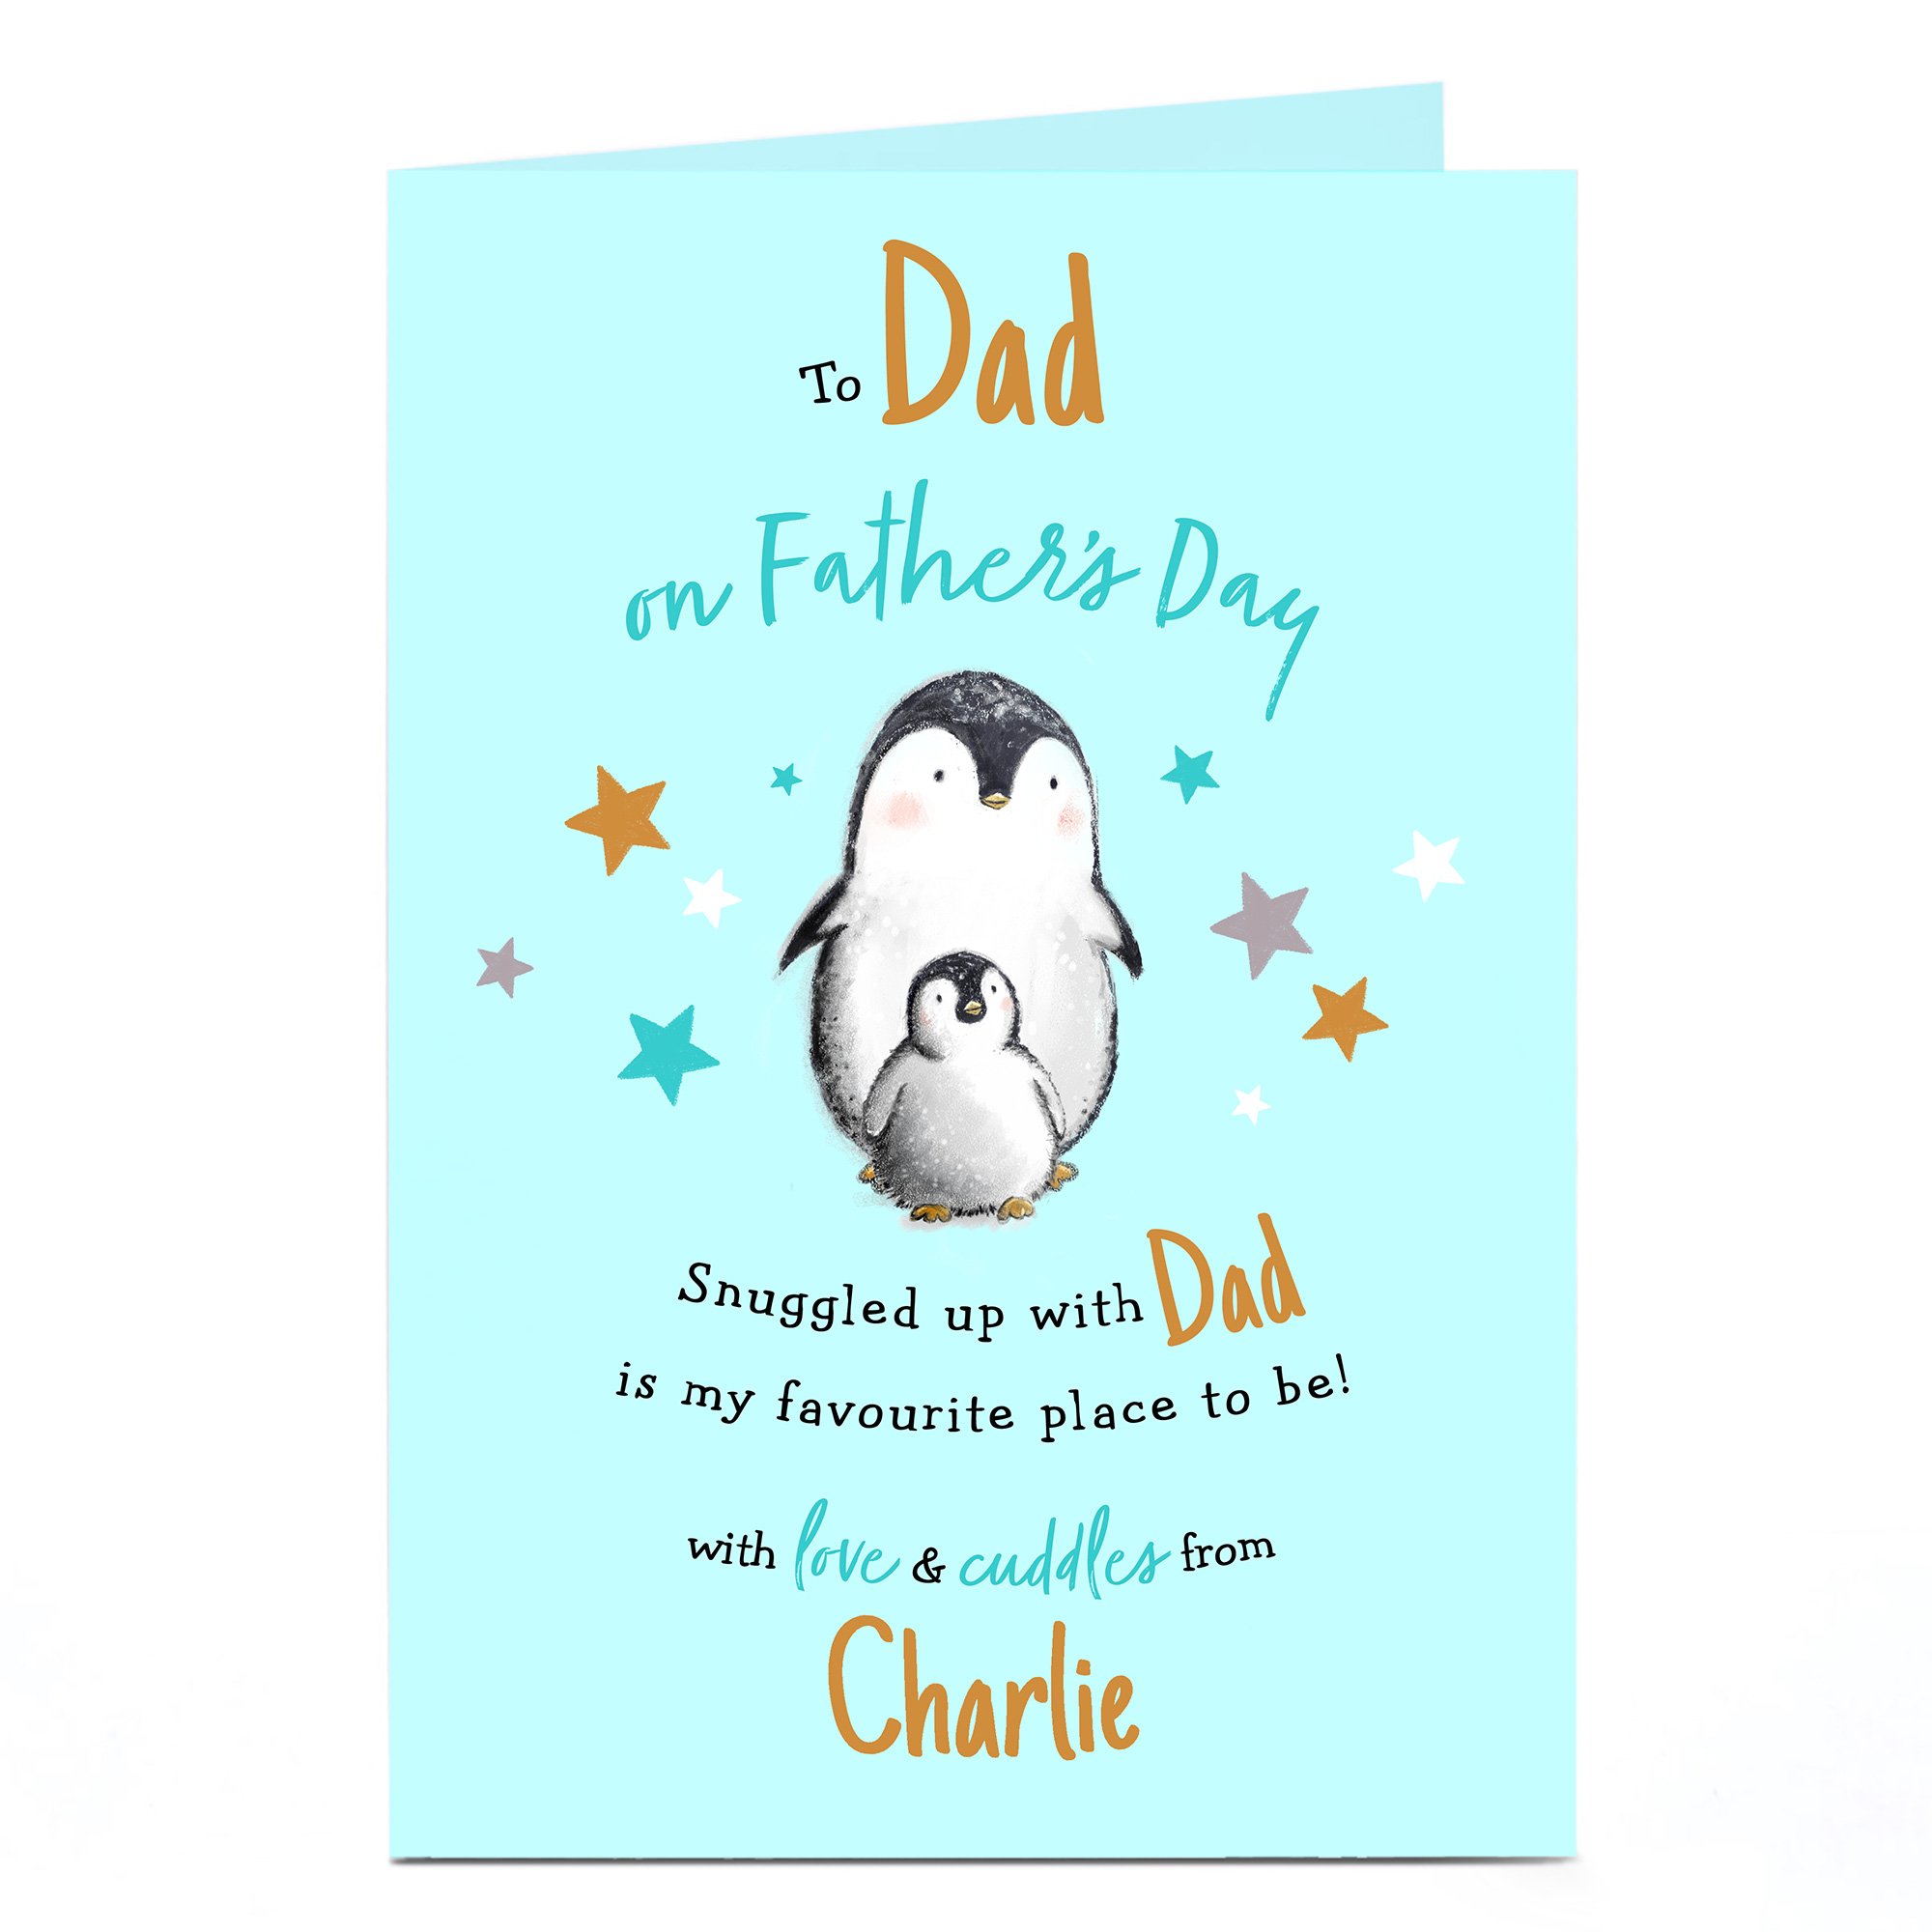 Personalised Father's Day Card - Penguin Dad